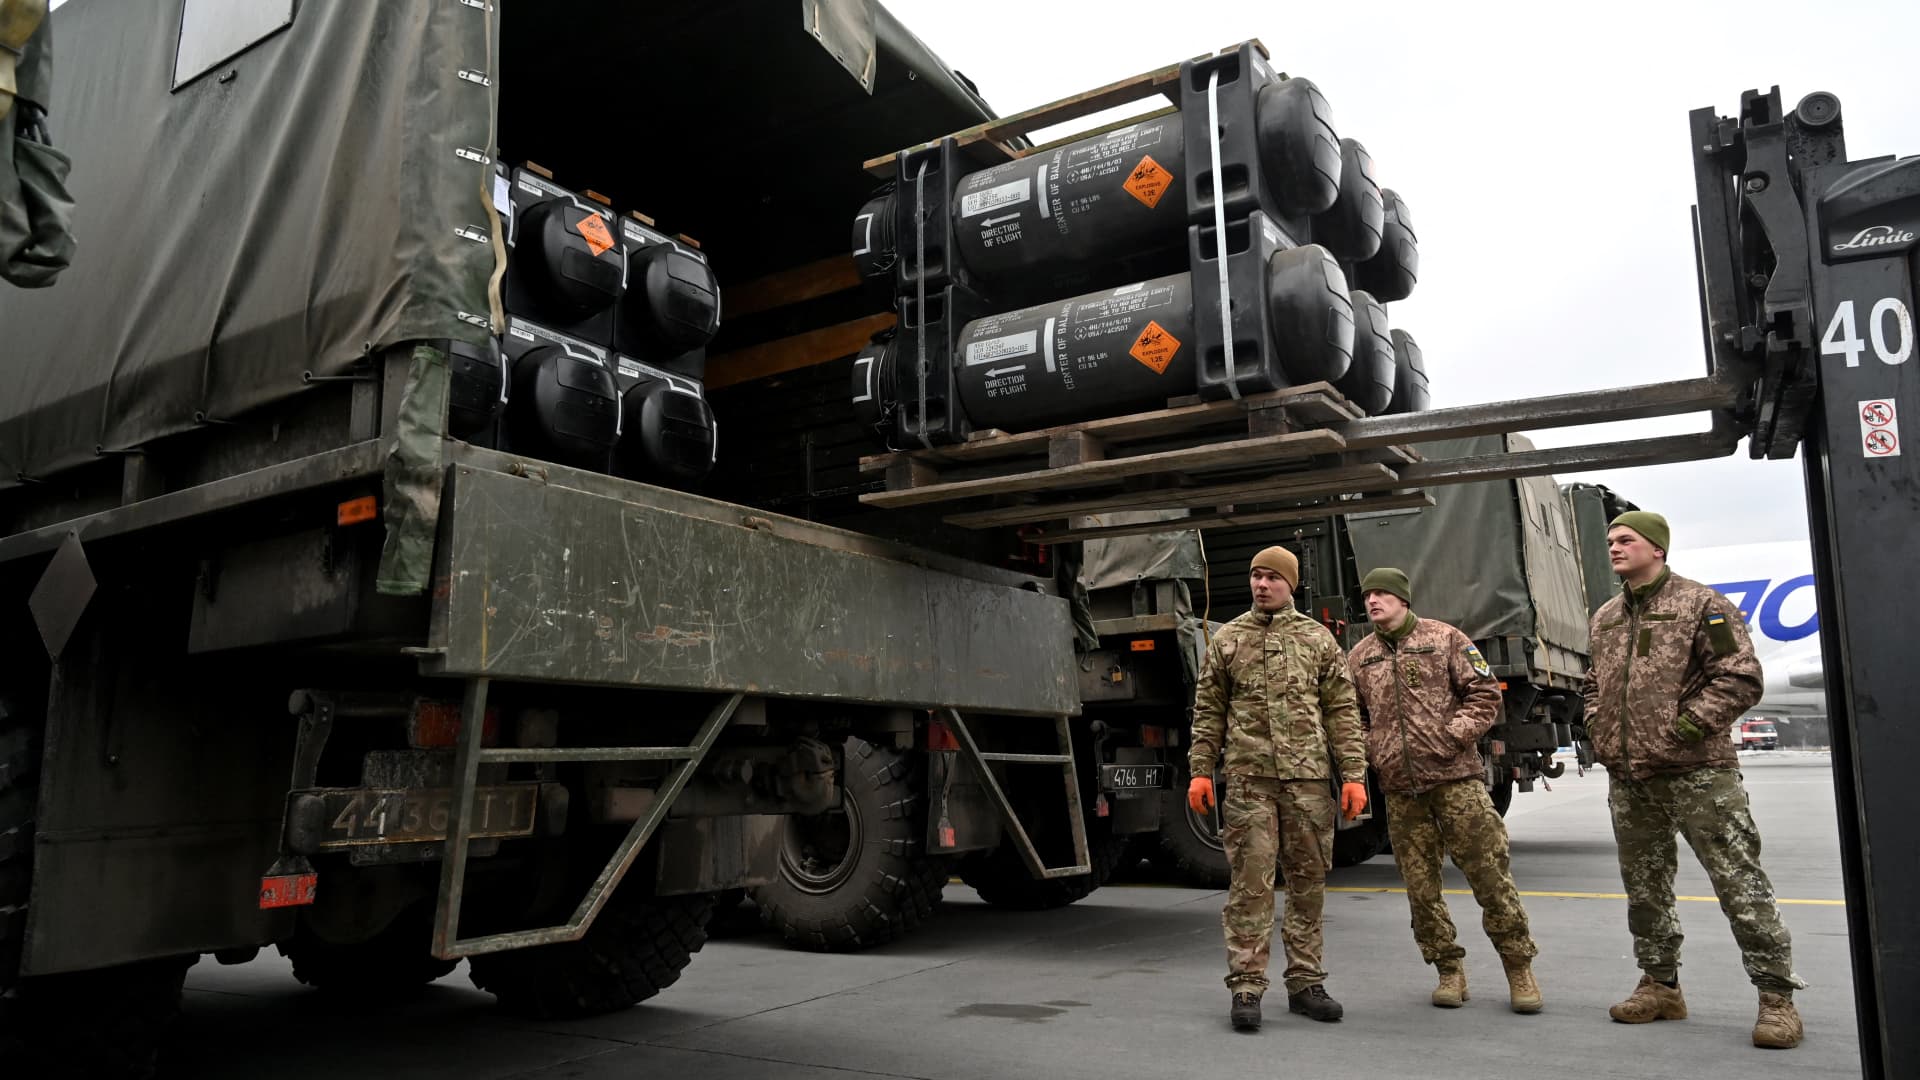 Ukraine was already stocking up on U.S.-made Javelins before Russia invaded. Here a group of Ukrainian servicemen take a shipment of Javelins in early February, as Russia positioned troops on Ukraine's border.